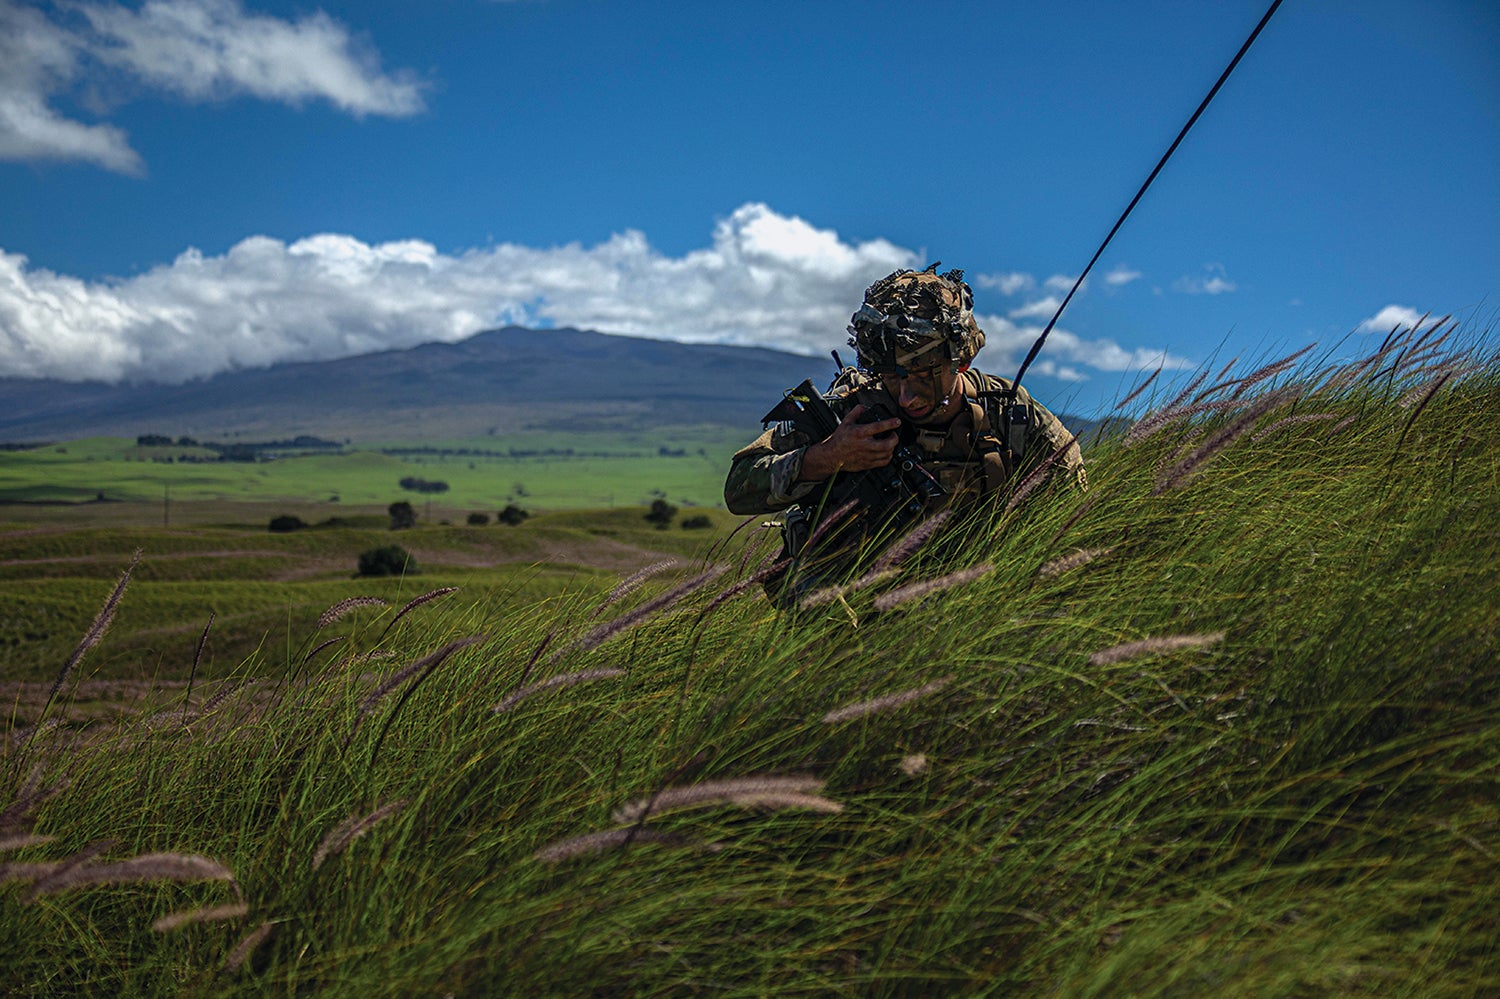 Troops from the 2nd Battalion, 11th Field Artillery Regiment, conduct field reconnaissance at Pohakuloa Training Area. (Credit: U.S. Army/Sgt. Daniel Proper)